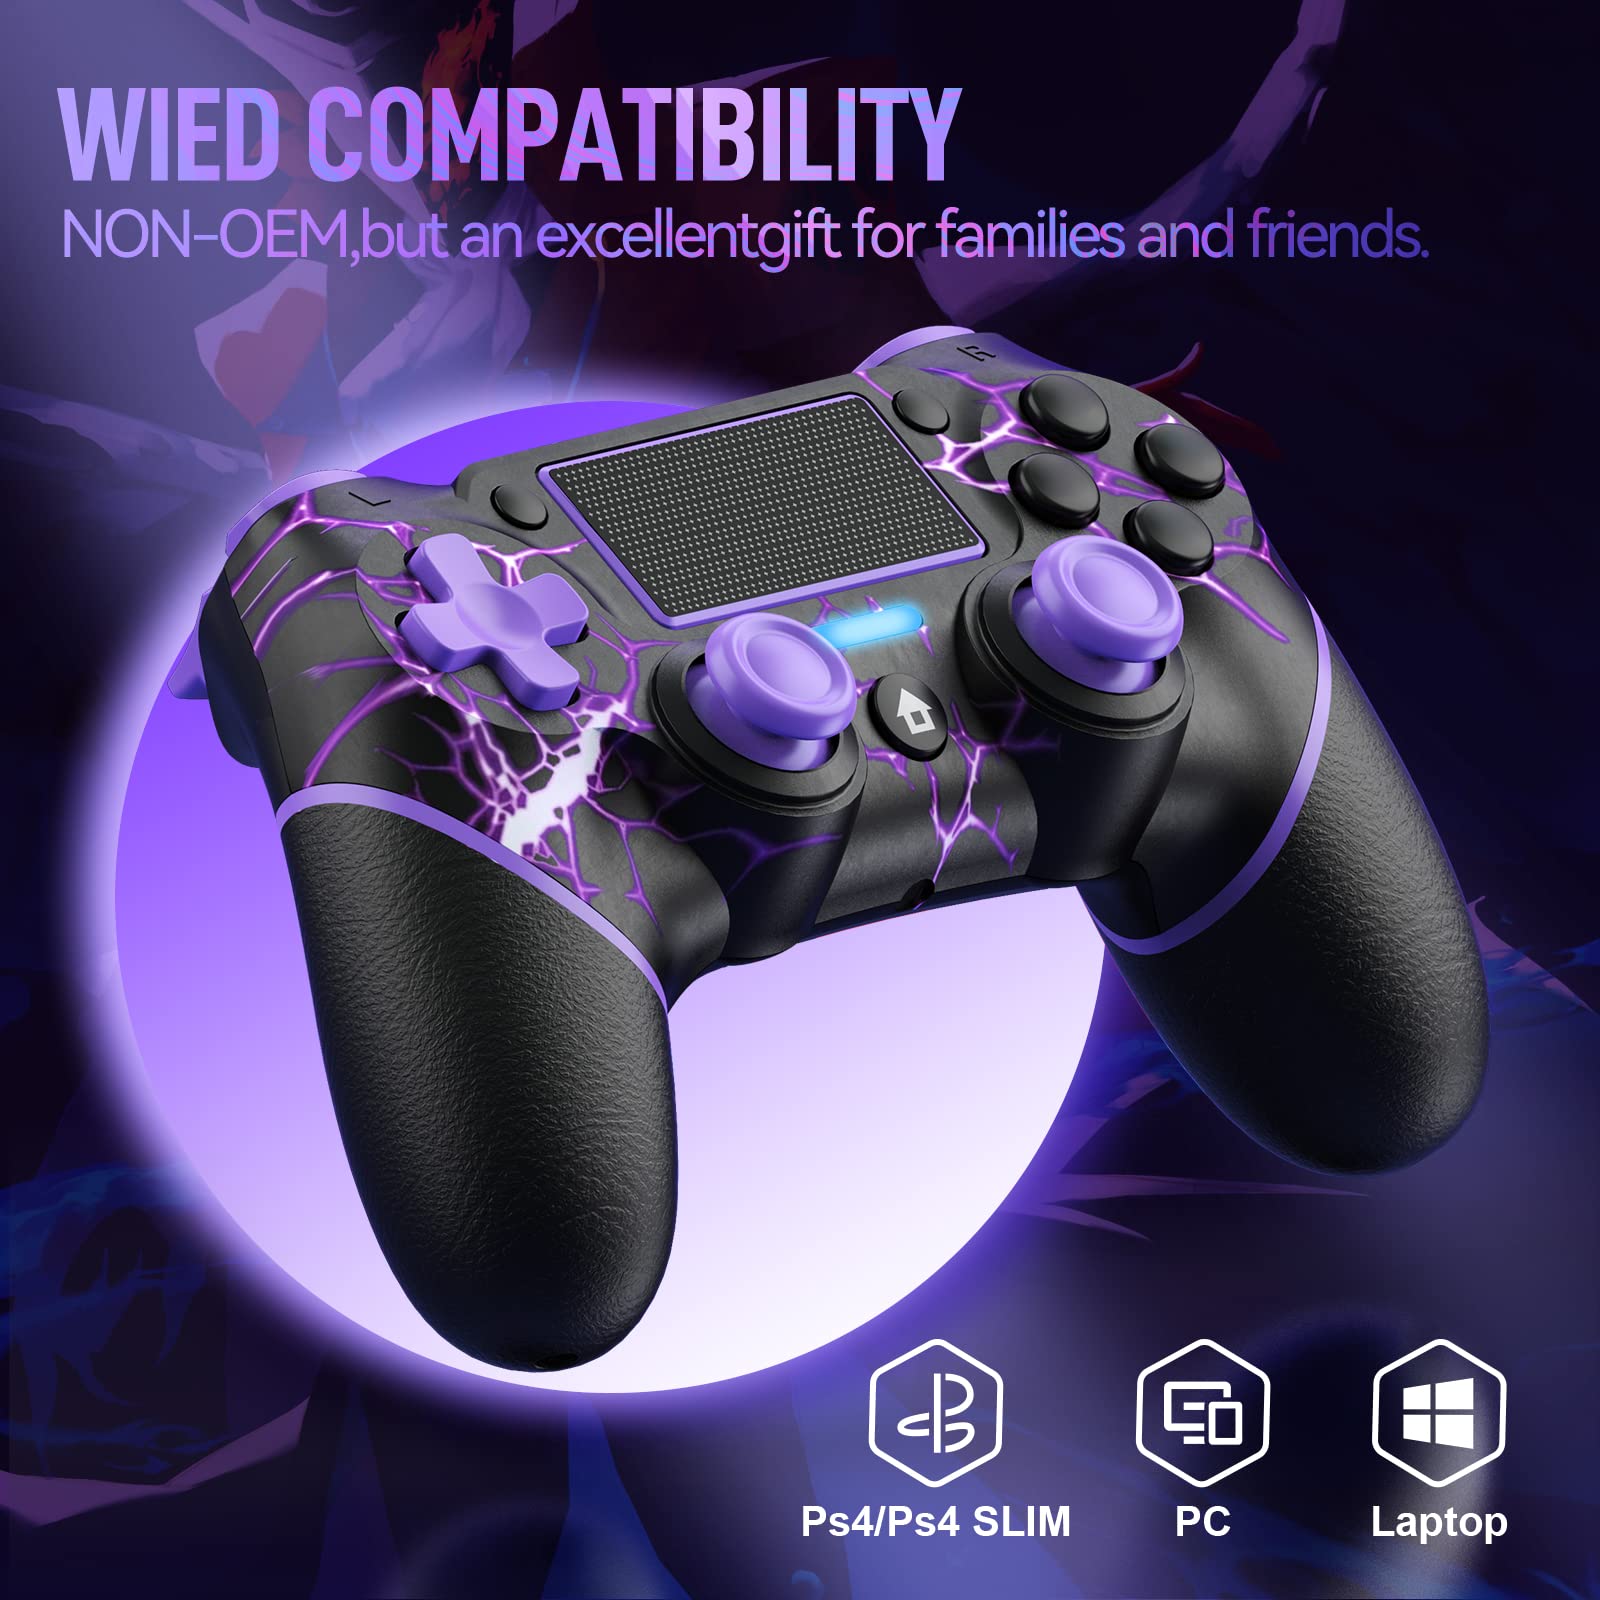 Wireless Controller for PS4/Pro/Slim Consoles, Gamepad Controller with 6-Axis Motion Sensor/Audio Function/Charging Cable - Lightning